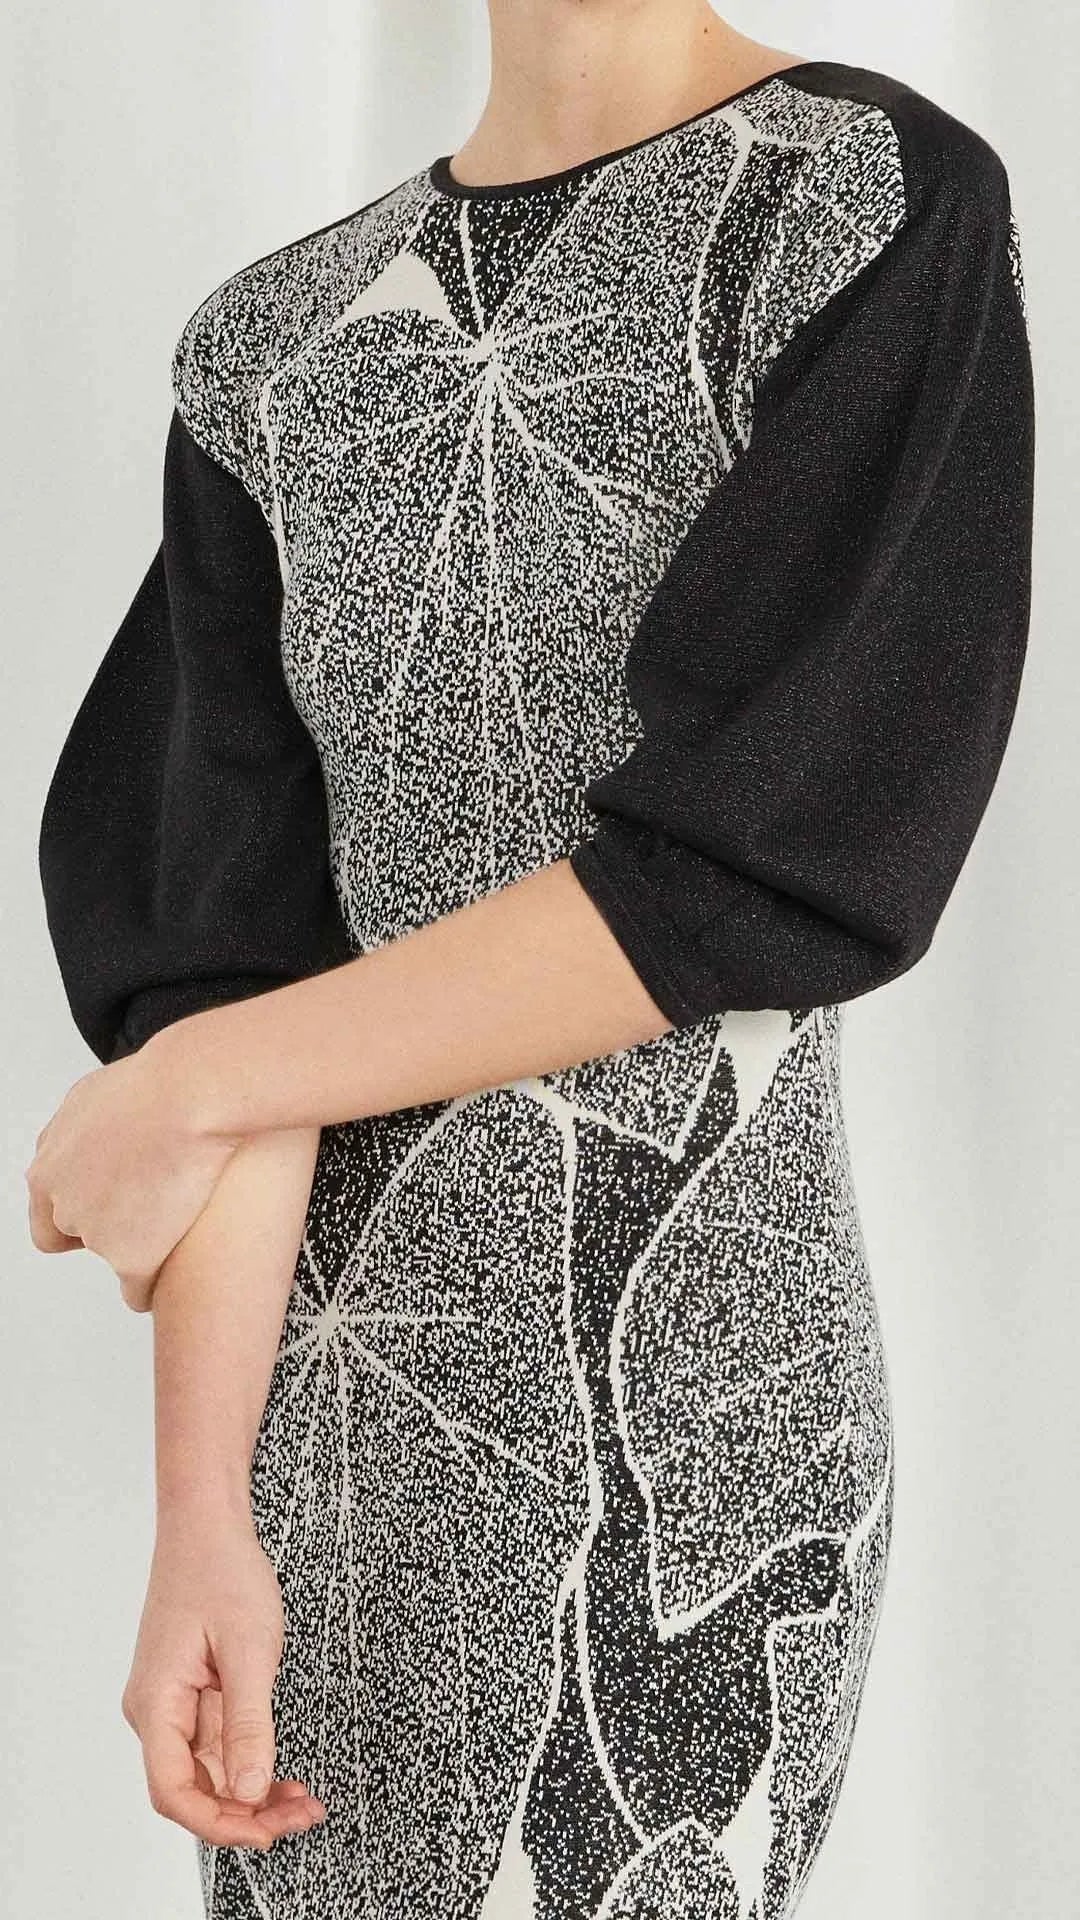 Clea Stuart Leaves Dress. Patterned in ecru and black silk knit with a hint of sparkle. It has contrasting black puffed sleeves and is full length. Shown in the model close up of the front.